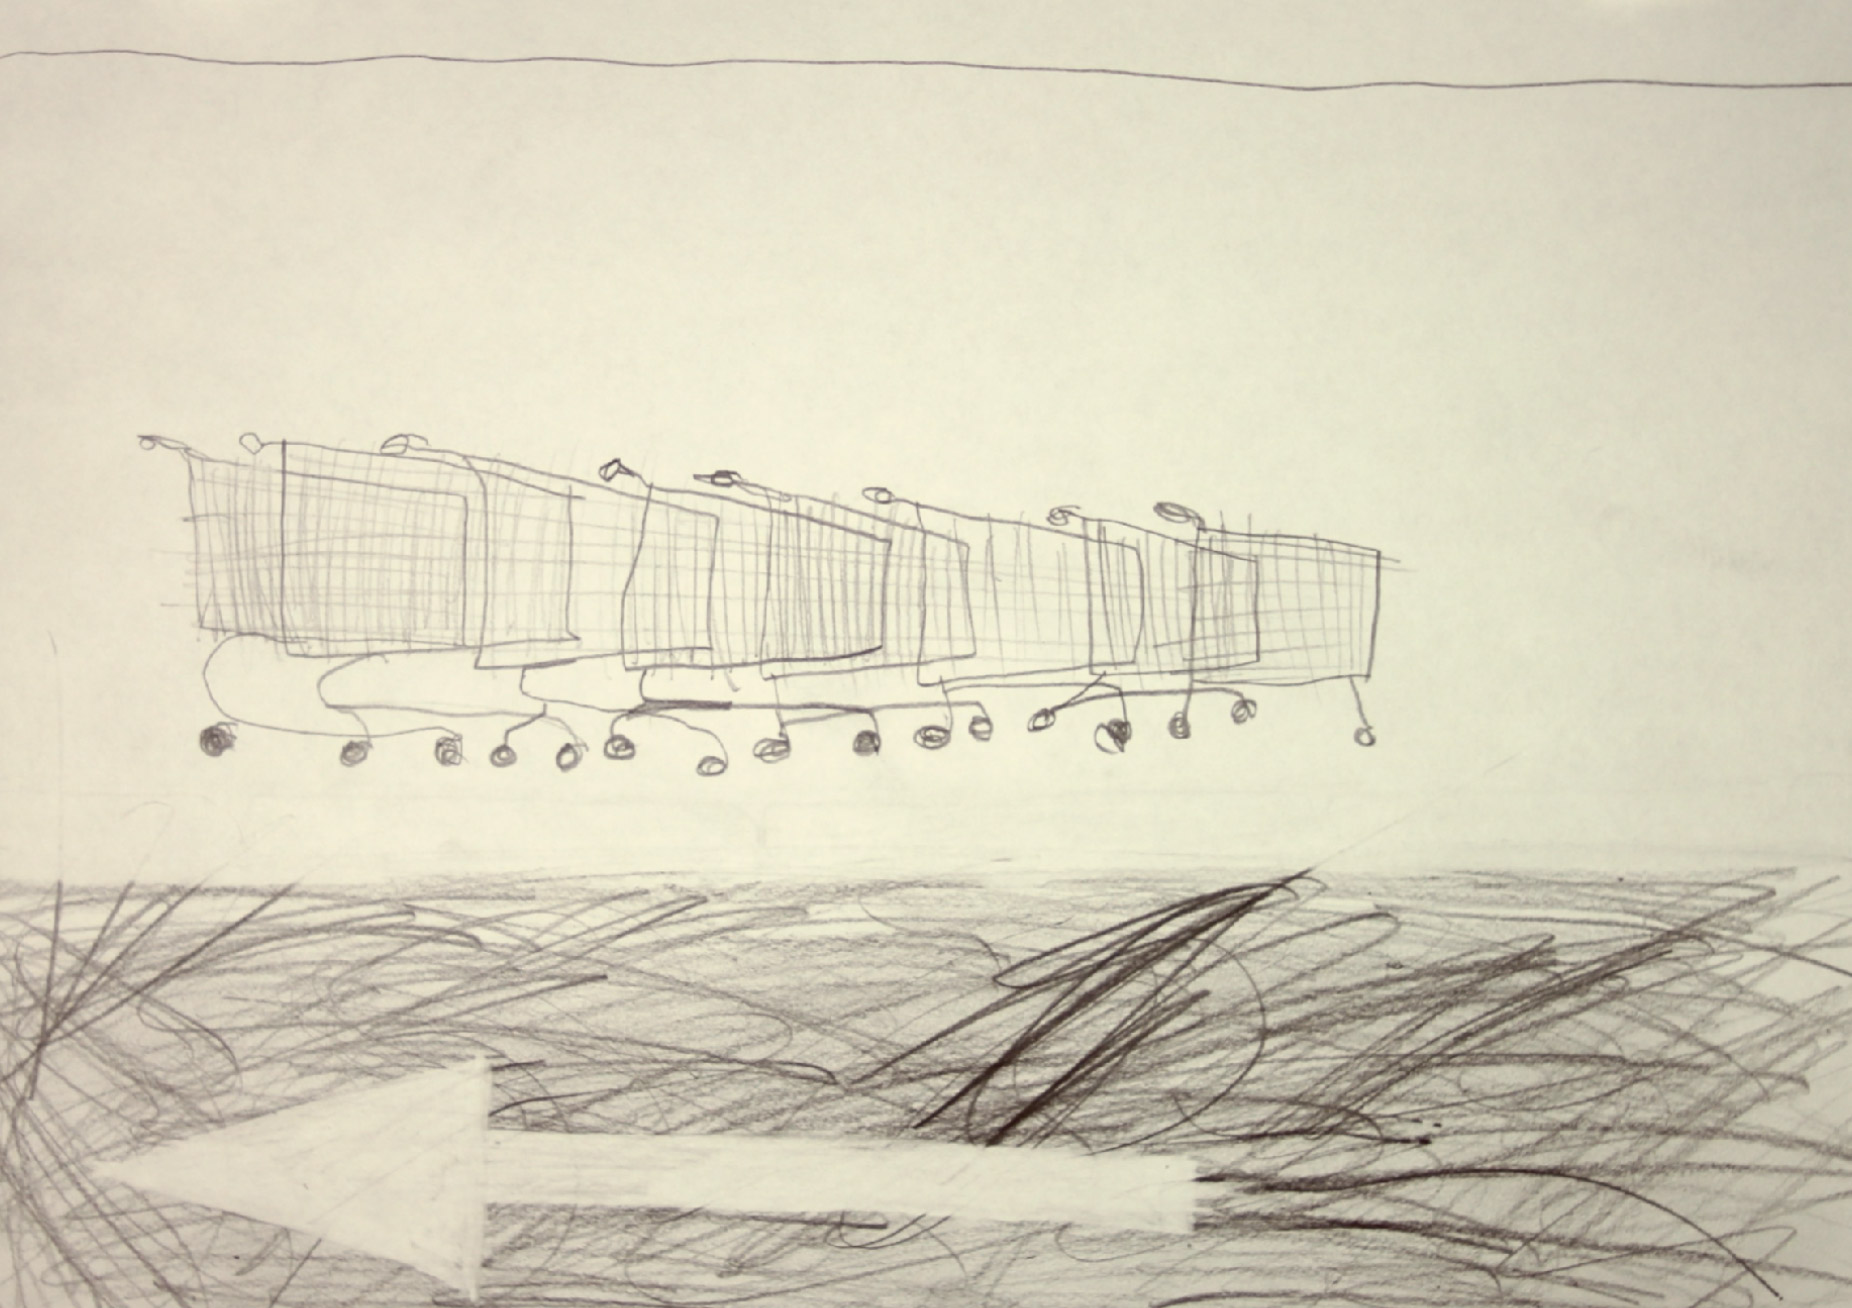 Pencil drawing of a line of shopping carts in a parking lot